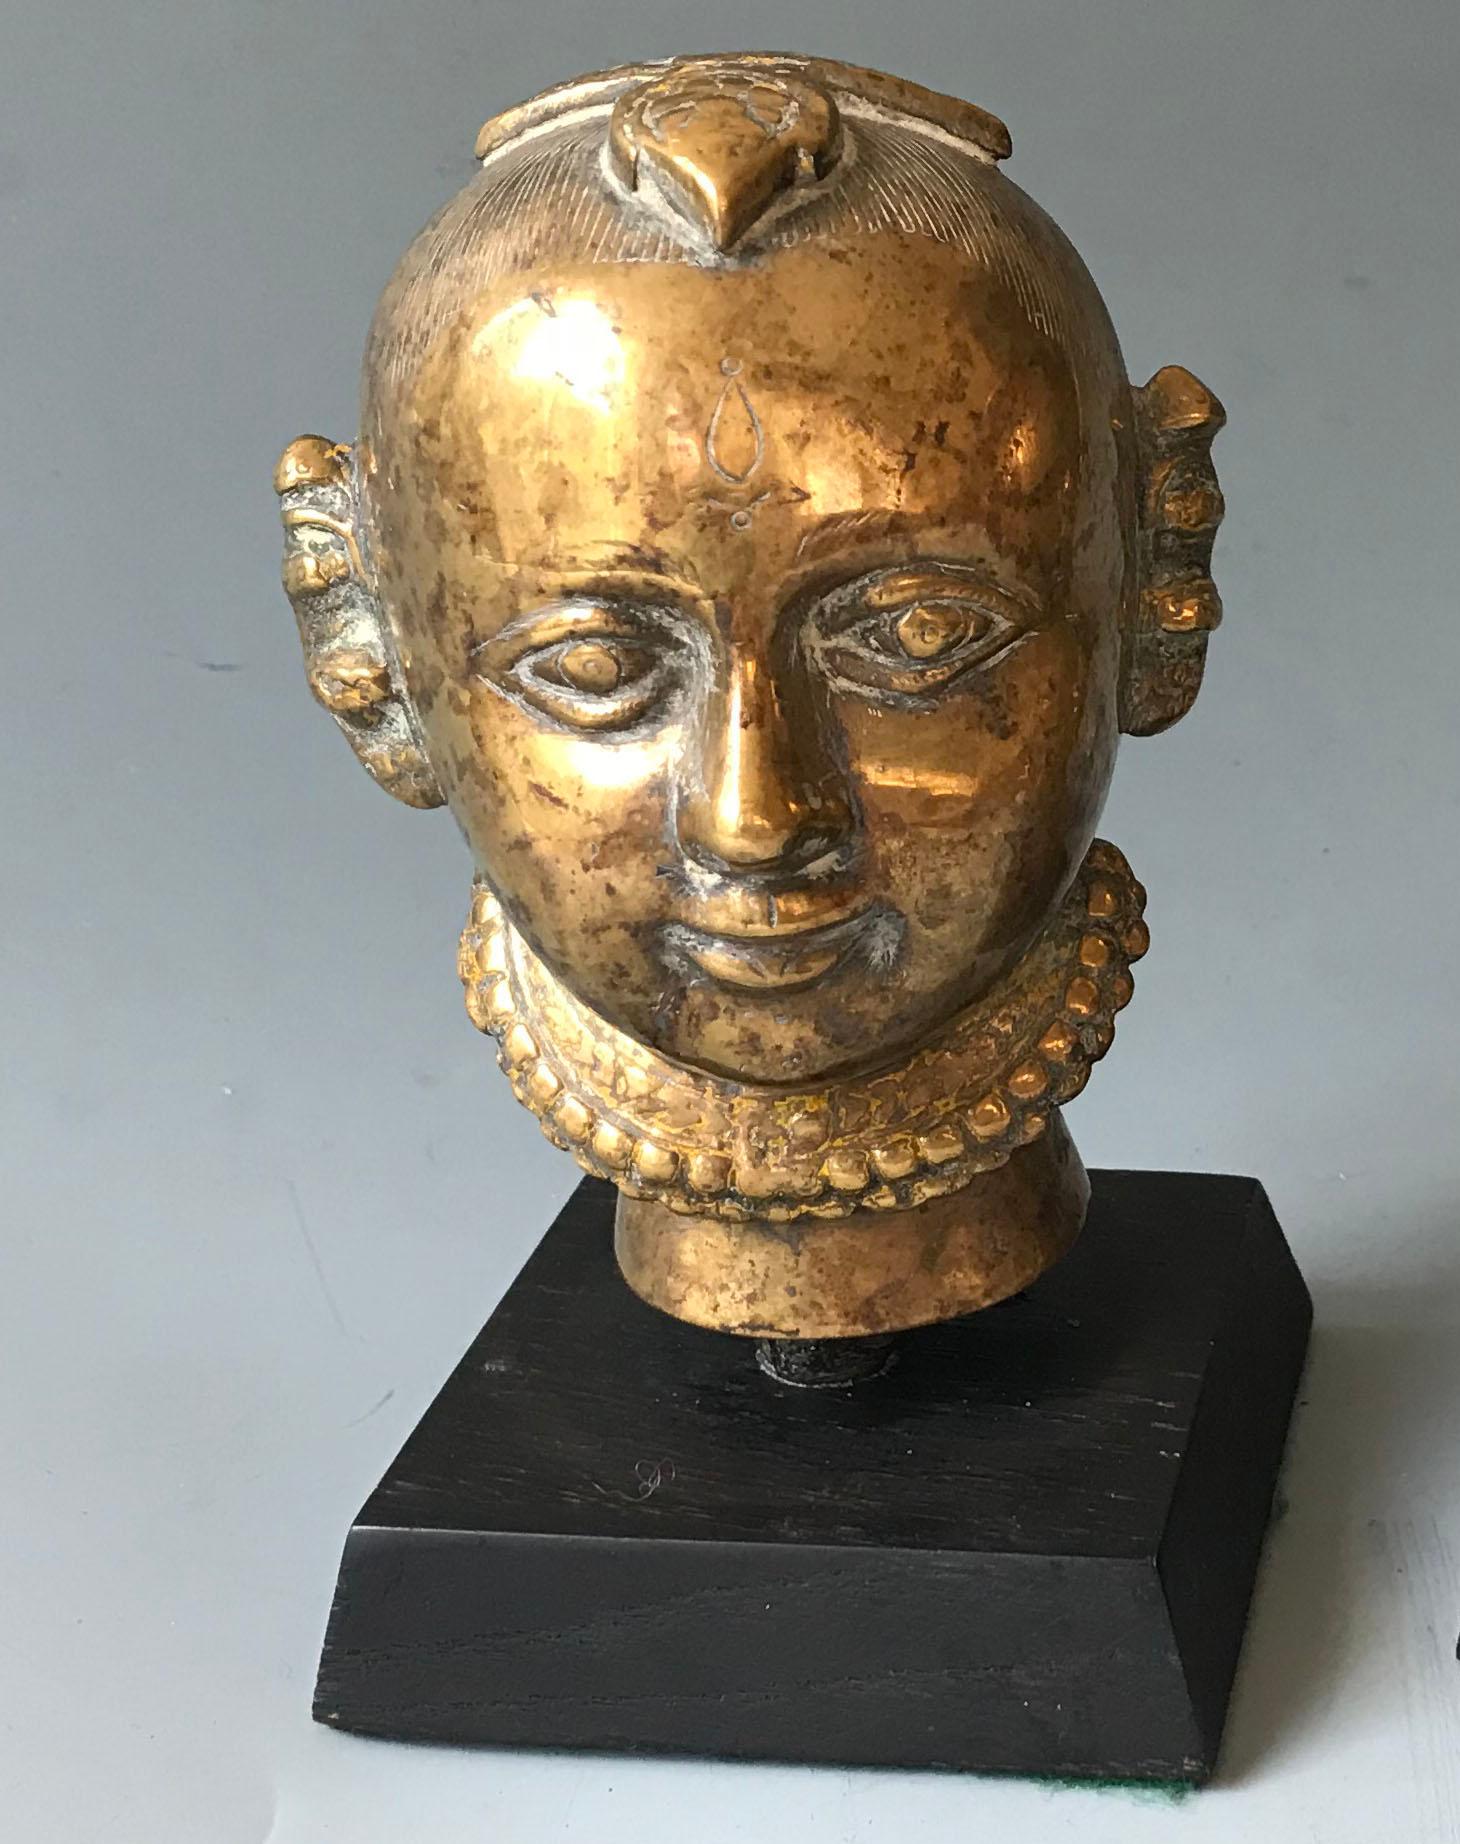 Antique Indian Hindu or Jain brass votive head 

Period :19th century

Measure: Height 12 cm
Presented with display base.